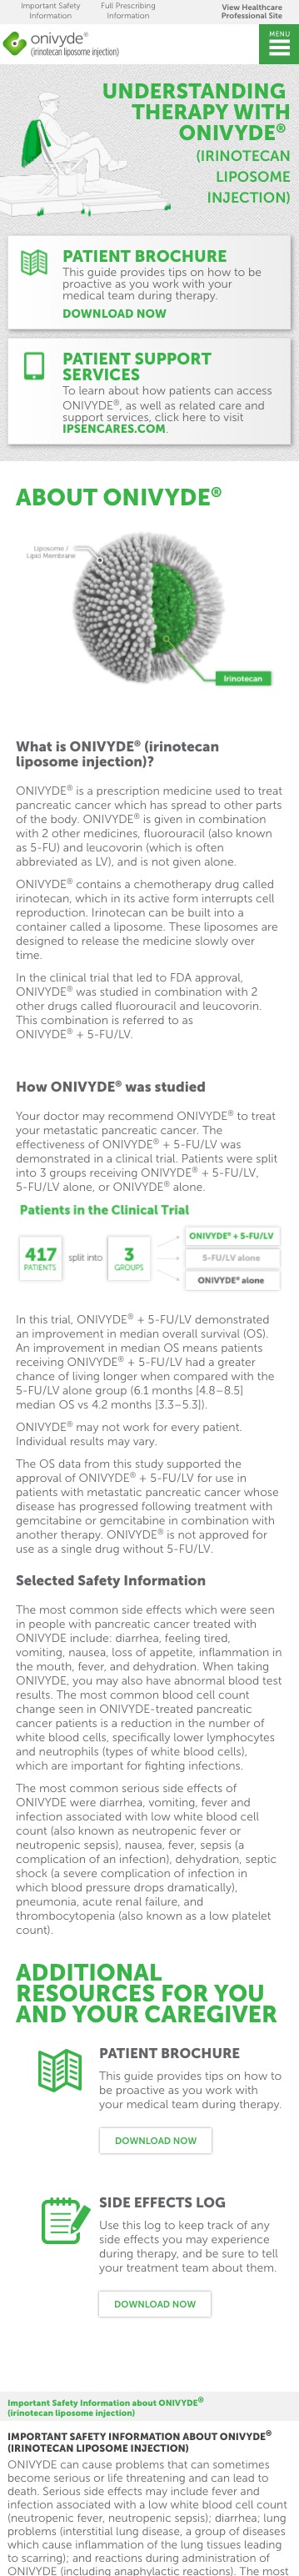 Oncology Pharma Website for Patients - Homepage Mobile